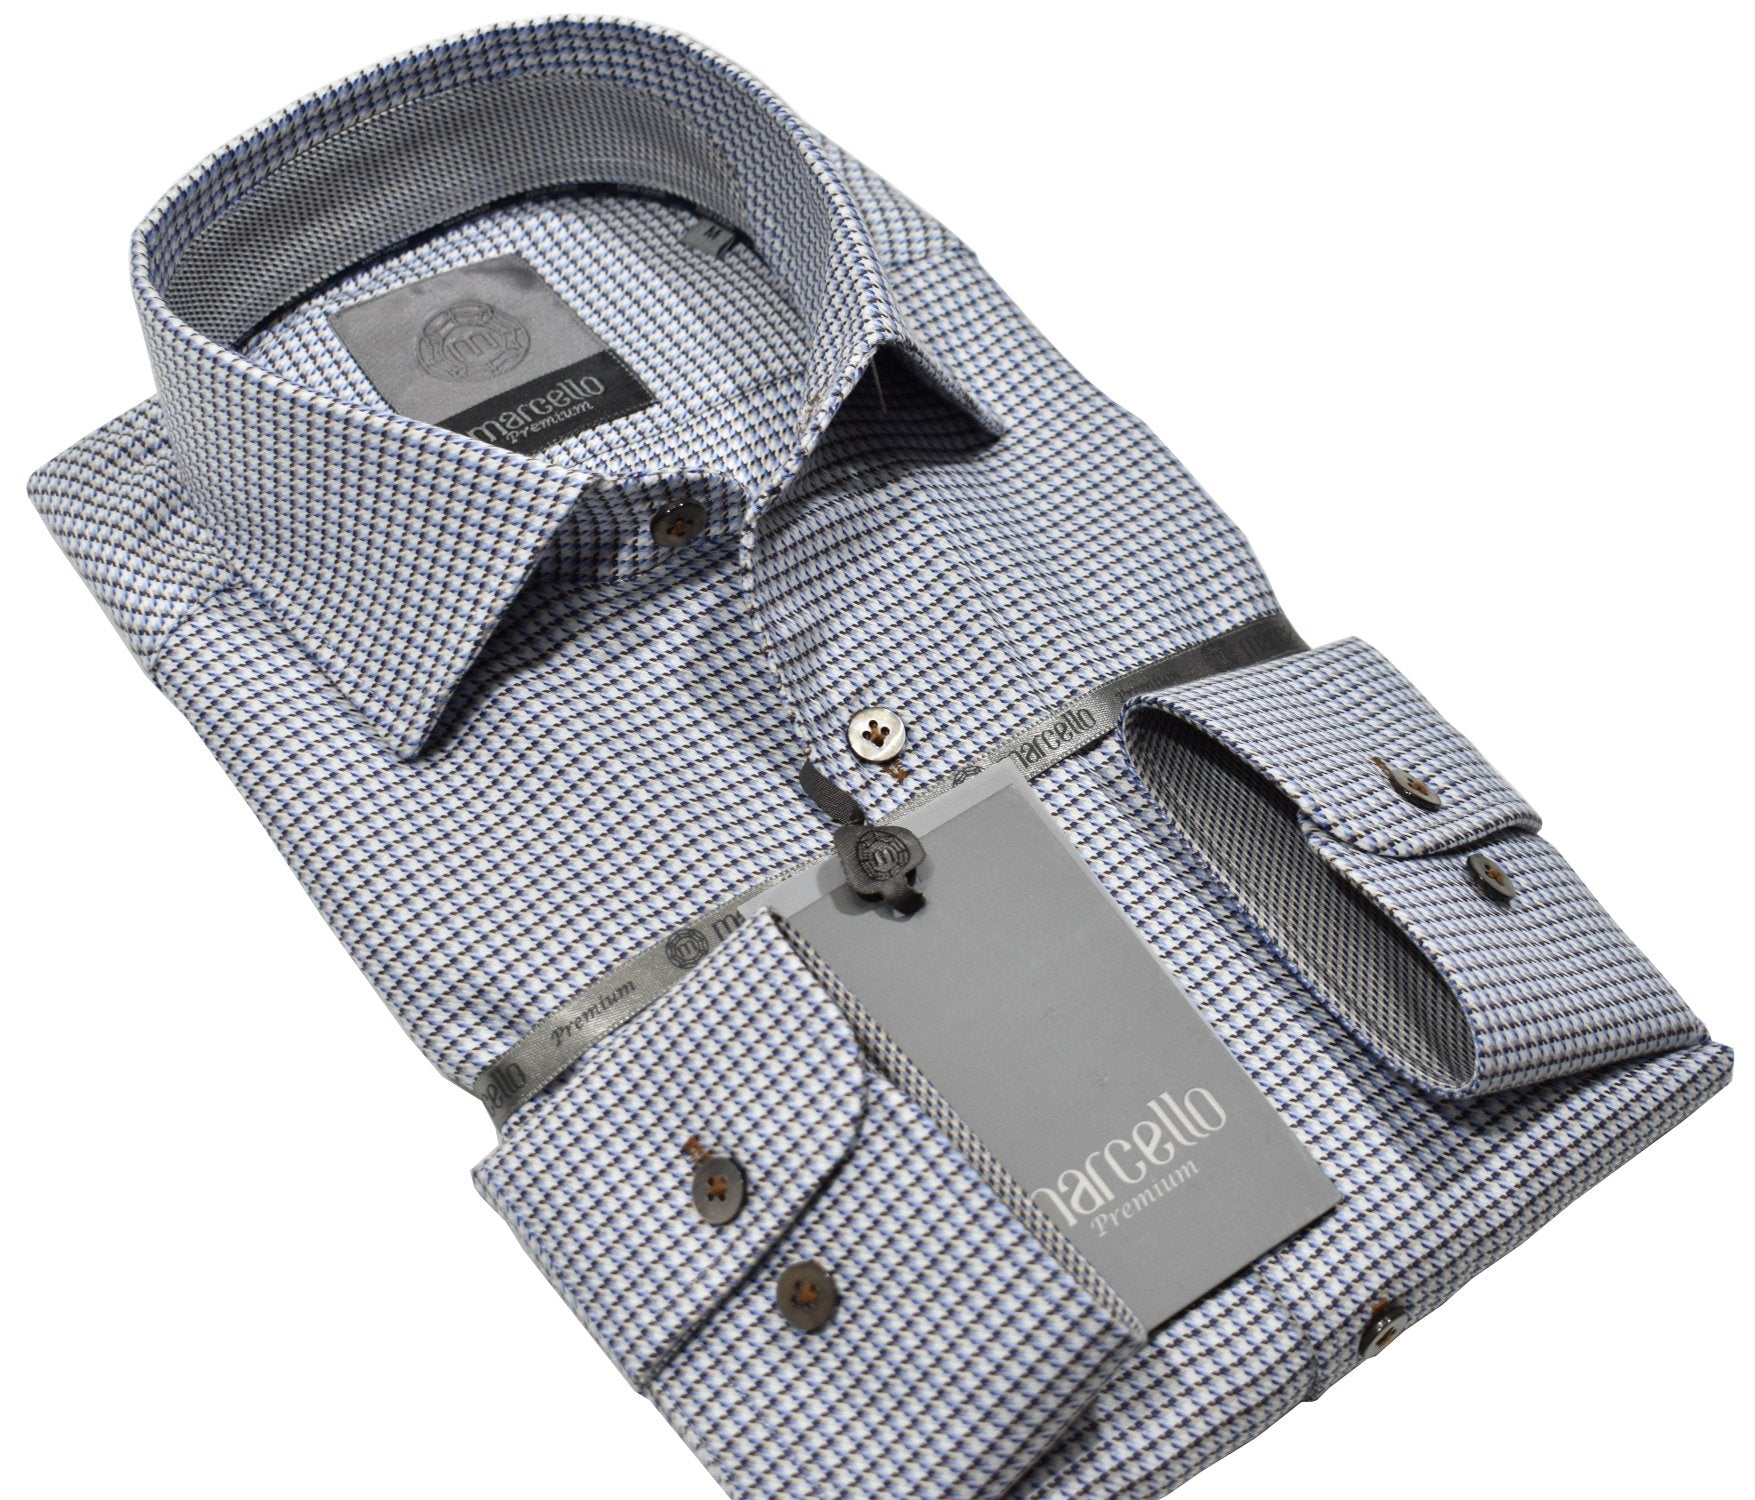 Elevate your wardrobe with the Marcello Premium Hartford Neat Tag shirt. Crafted from extra fine fabrics sourced from fine Italian mills, our Marcello Premium program offers 100's 2 ply shirts in rich classic patterns. With the Marcello exclusive one piece roll collar, you'll feel confident and stylish in any setting.